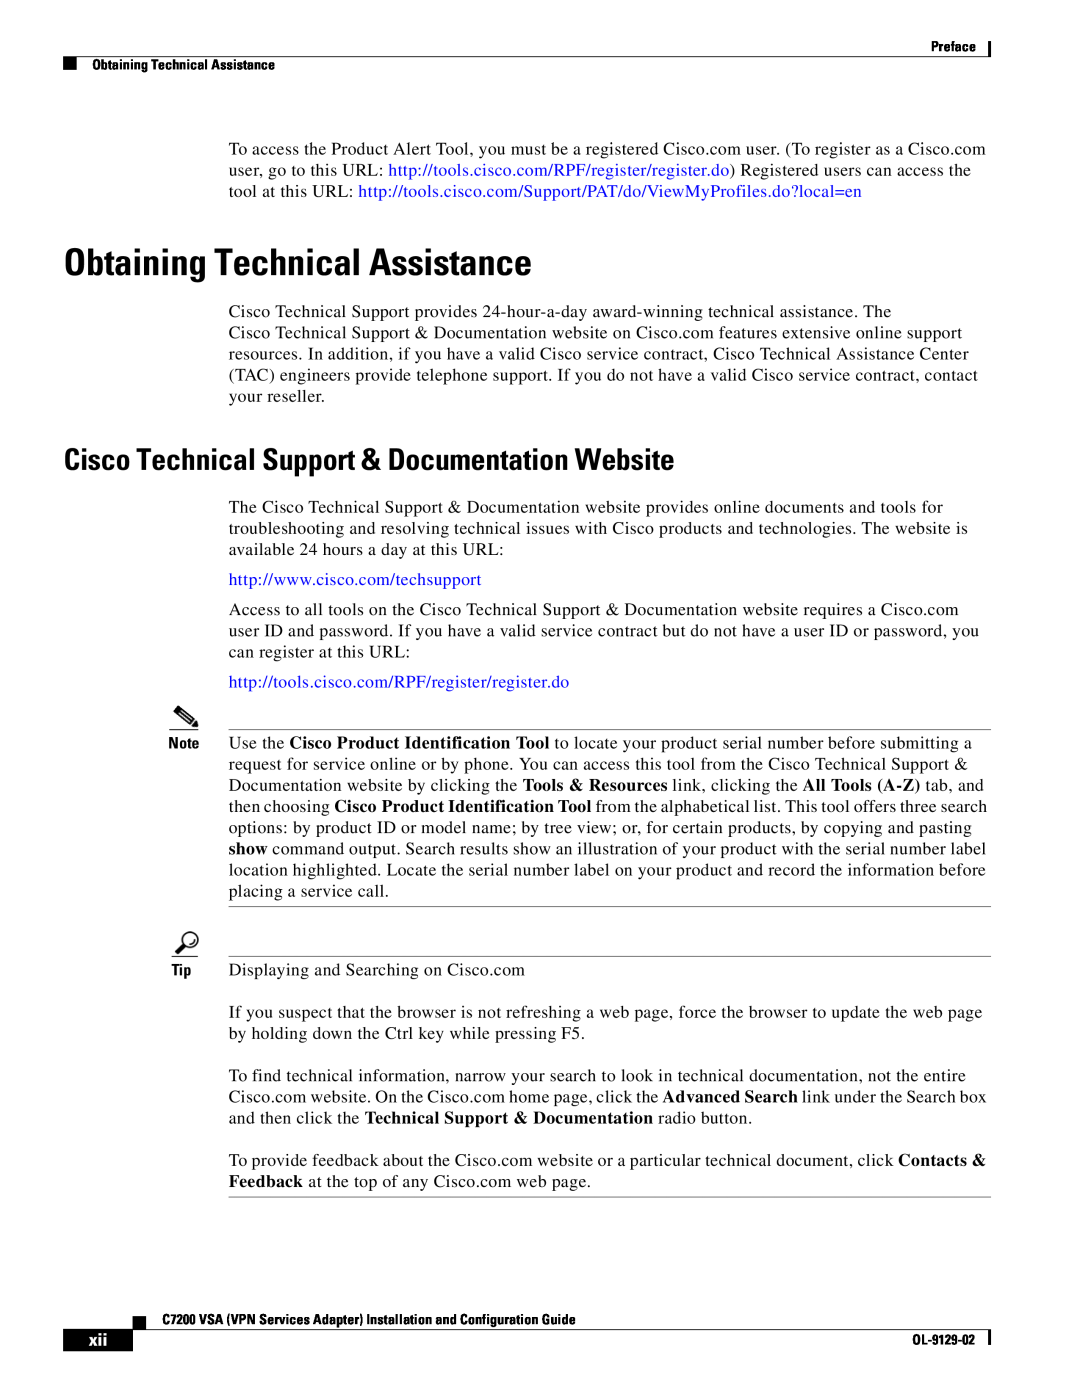 Cisco Systems C7200 manual Obtaining Technical Assistance, Cisco Technical Support & Documentation Website 